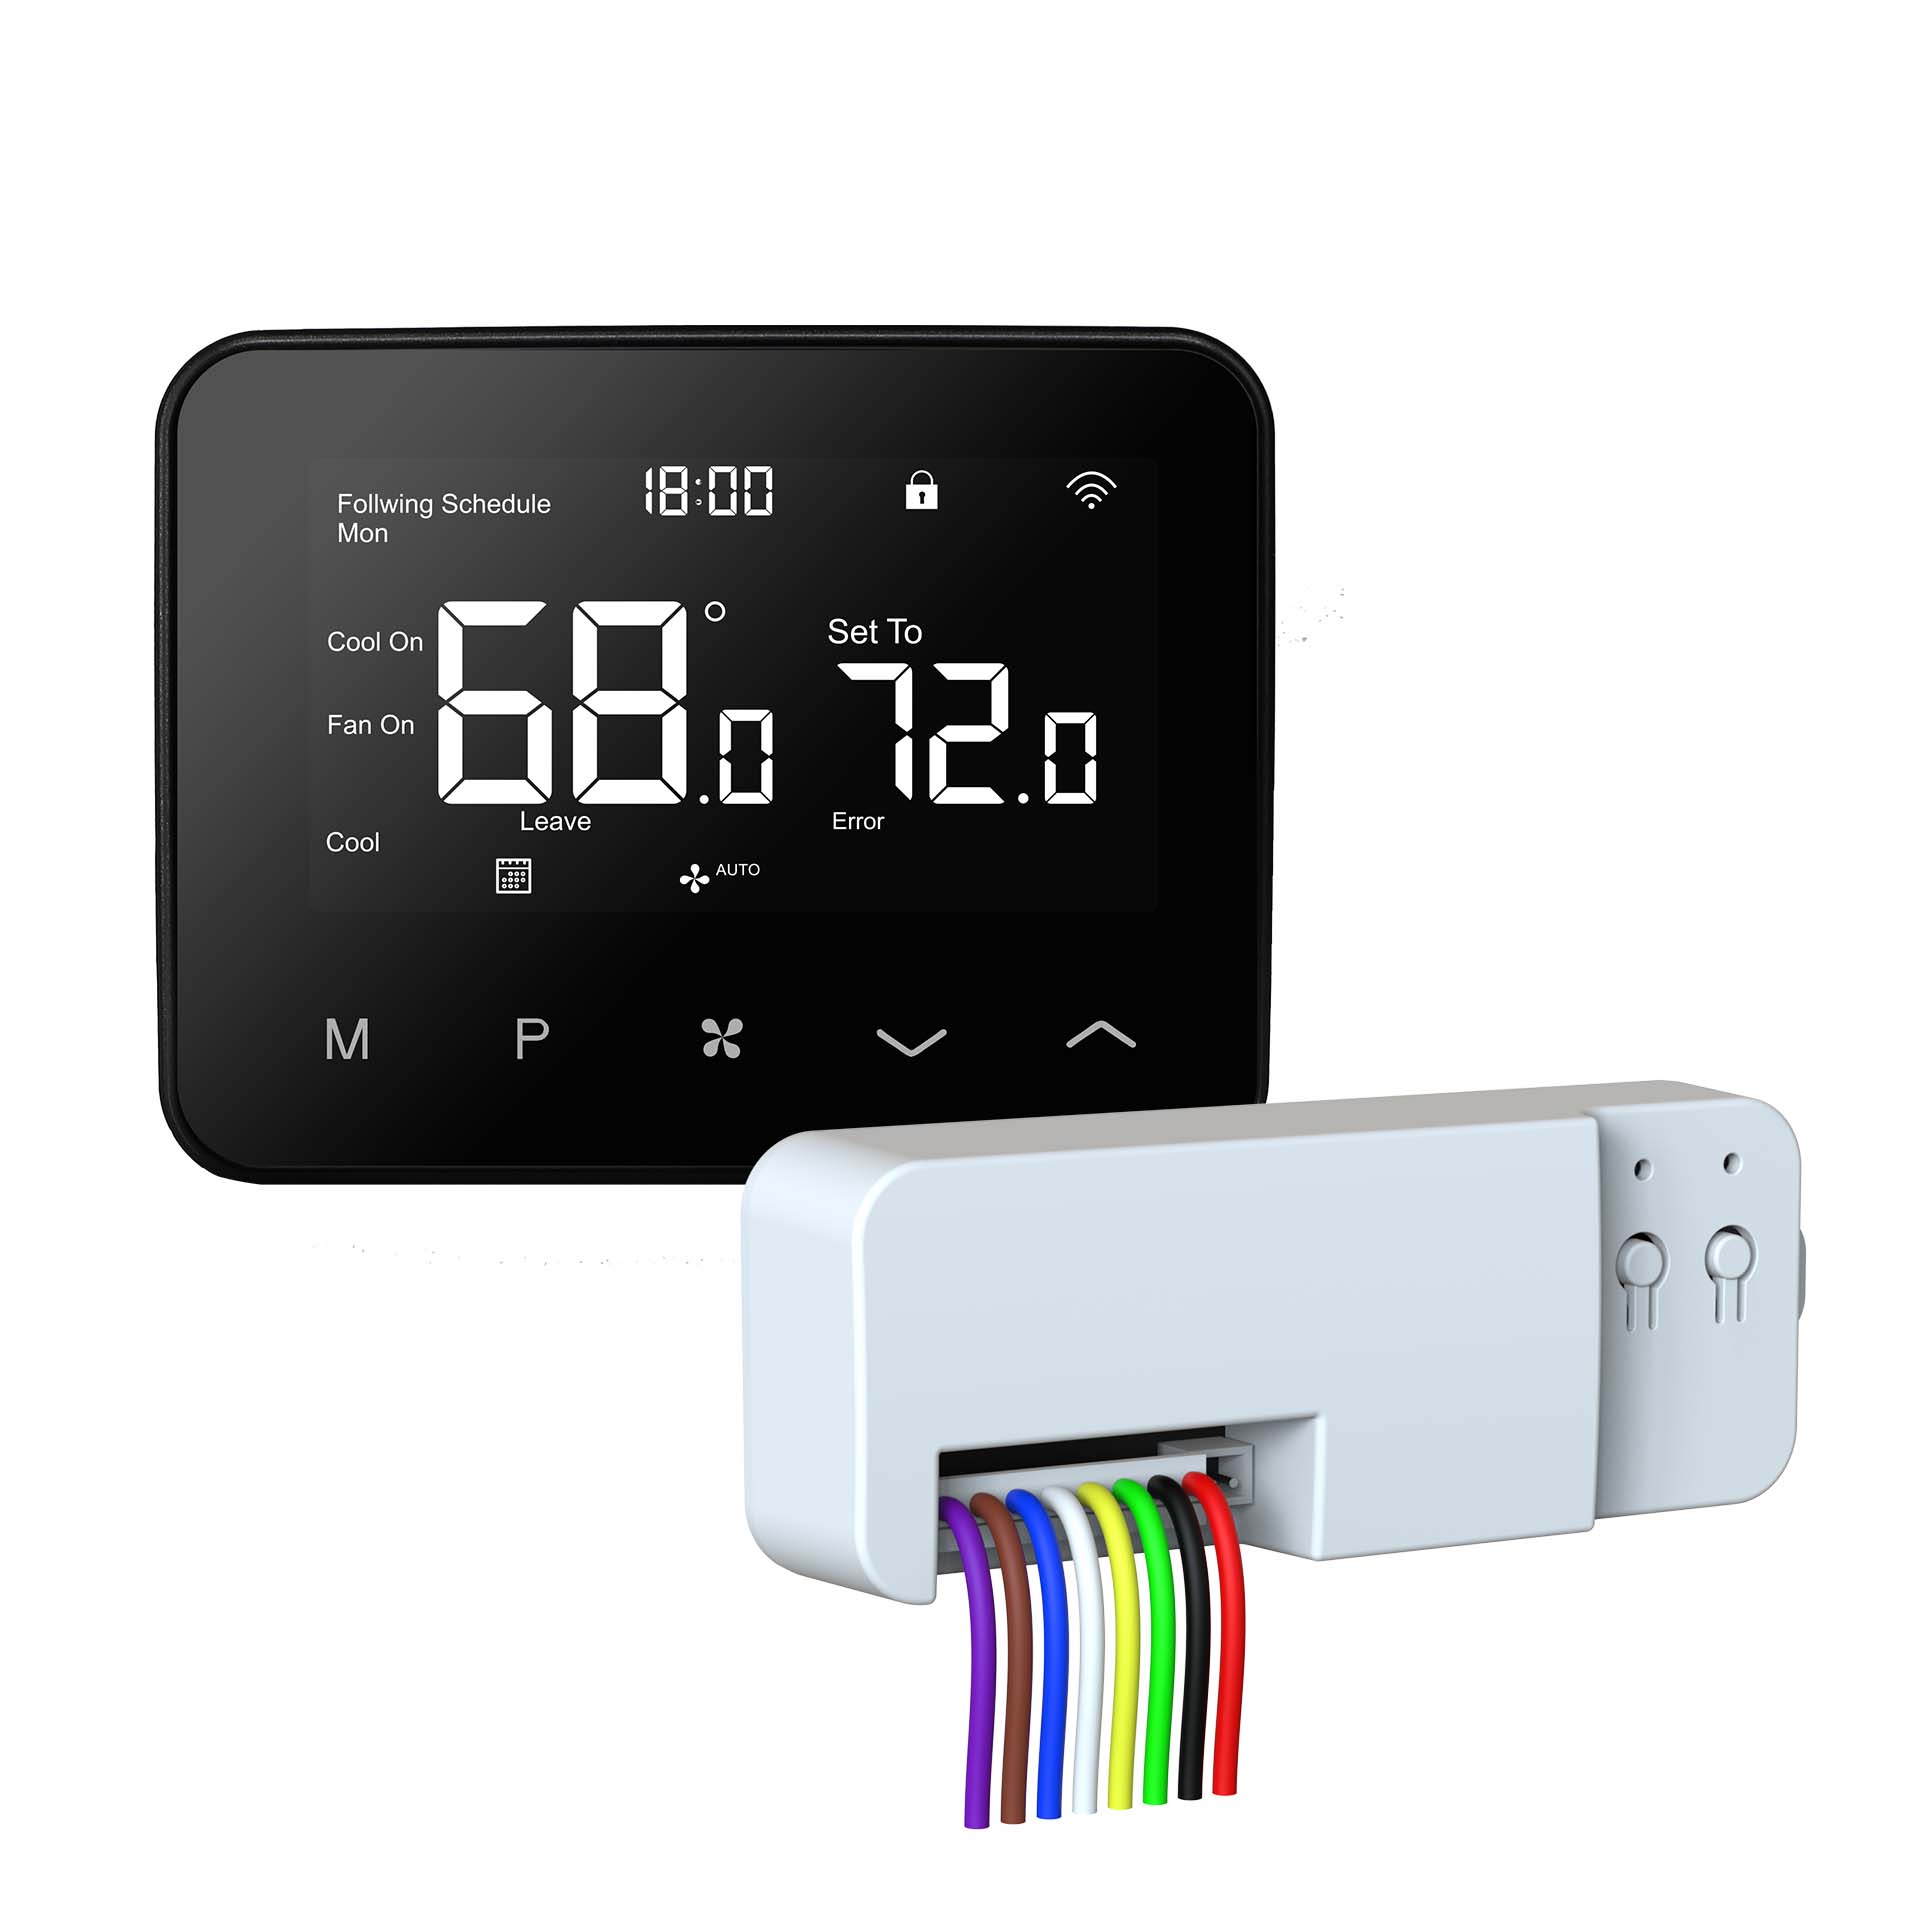 PTAC WIFI Thermostat Heating Cooling Control